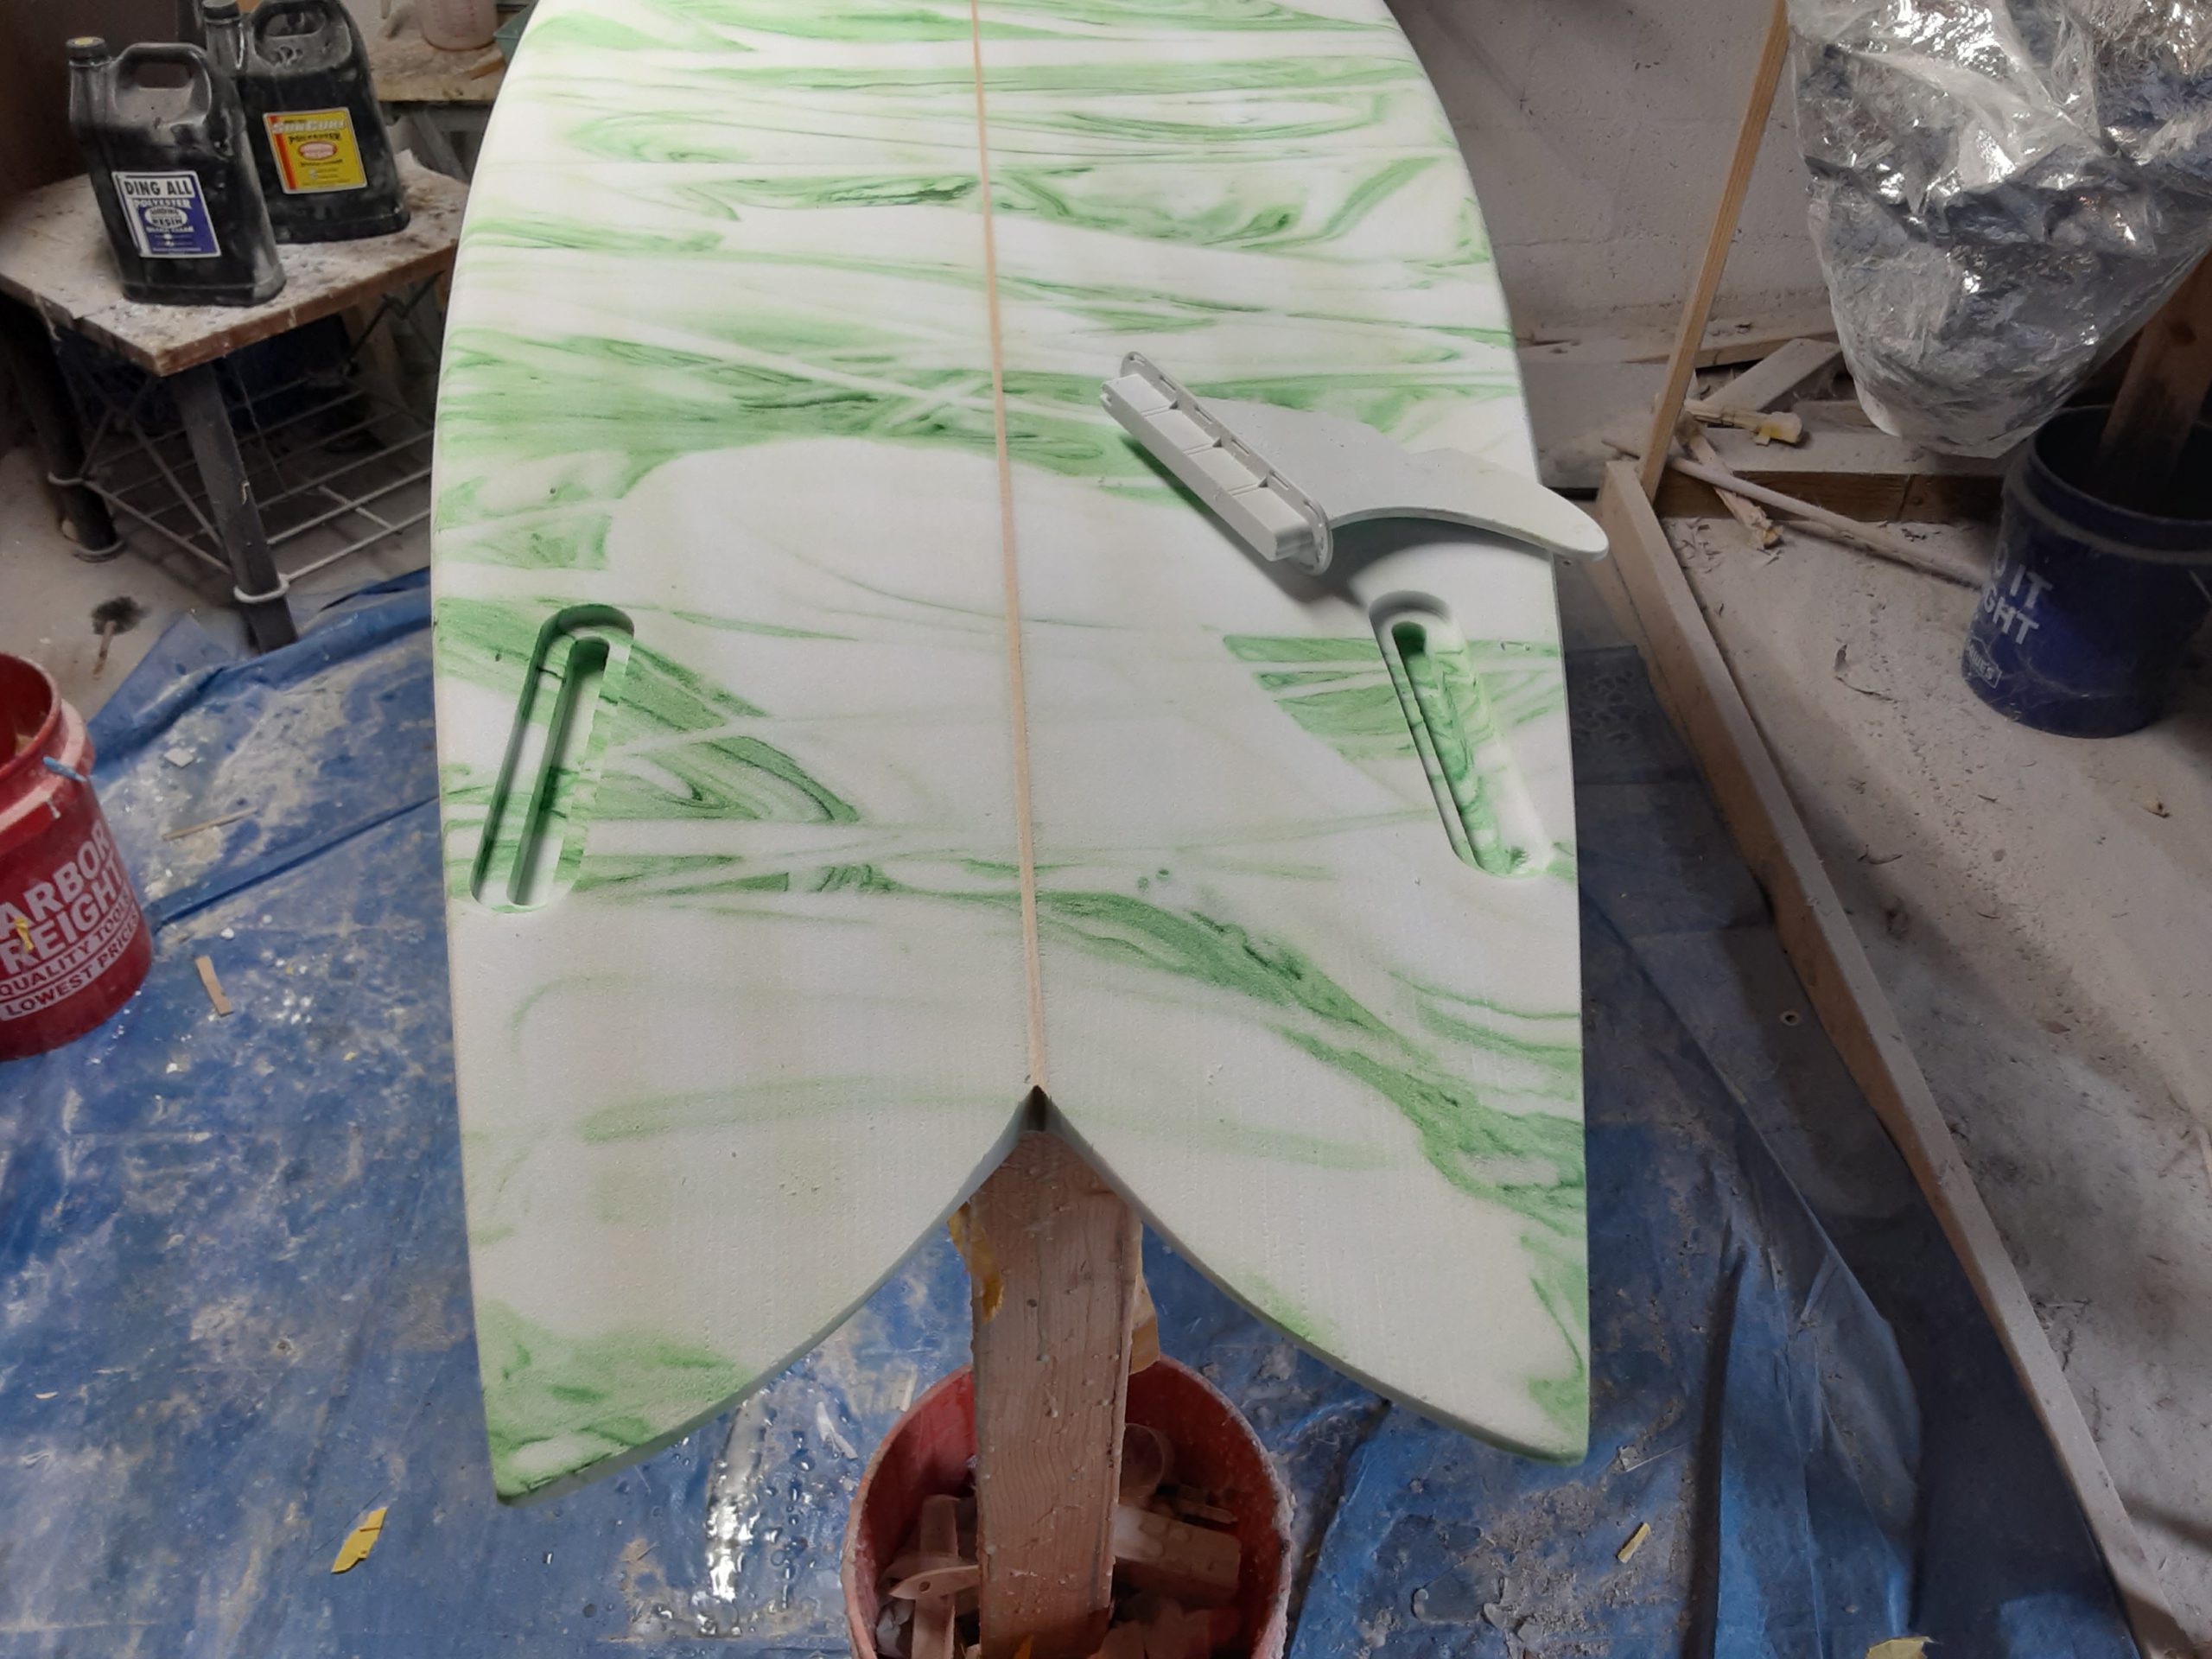 Twin Fin at Surfboard RX